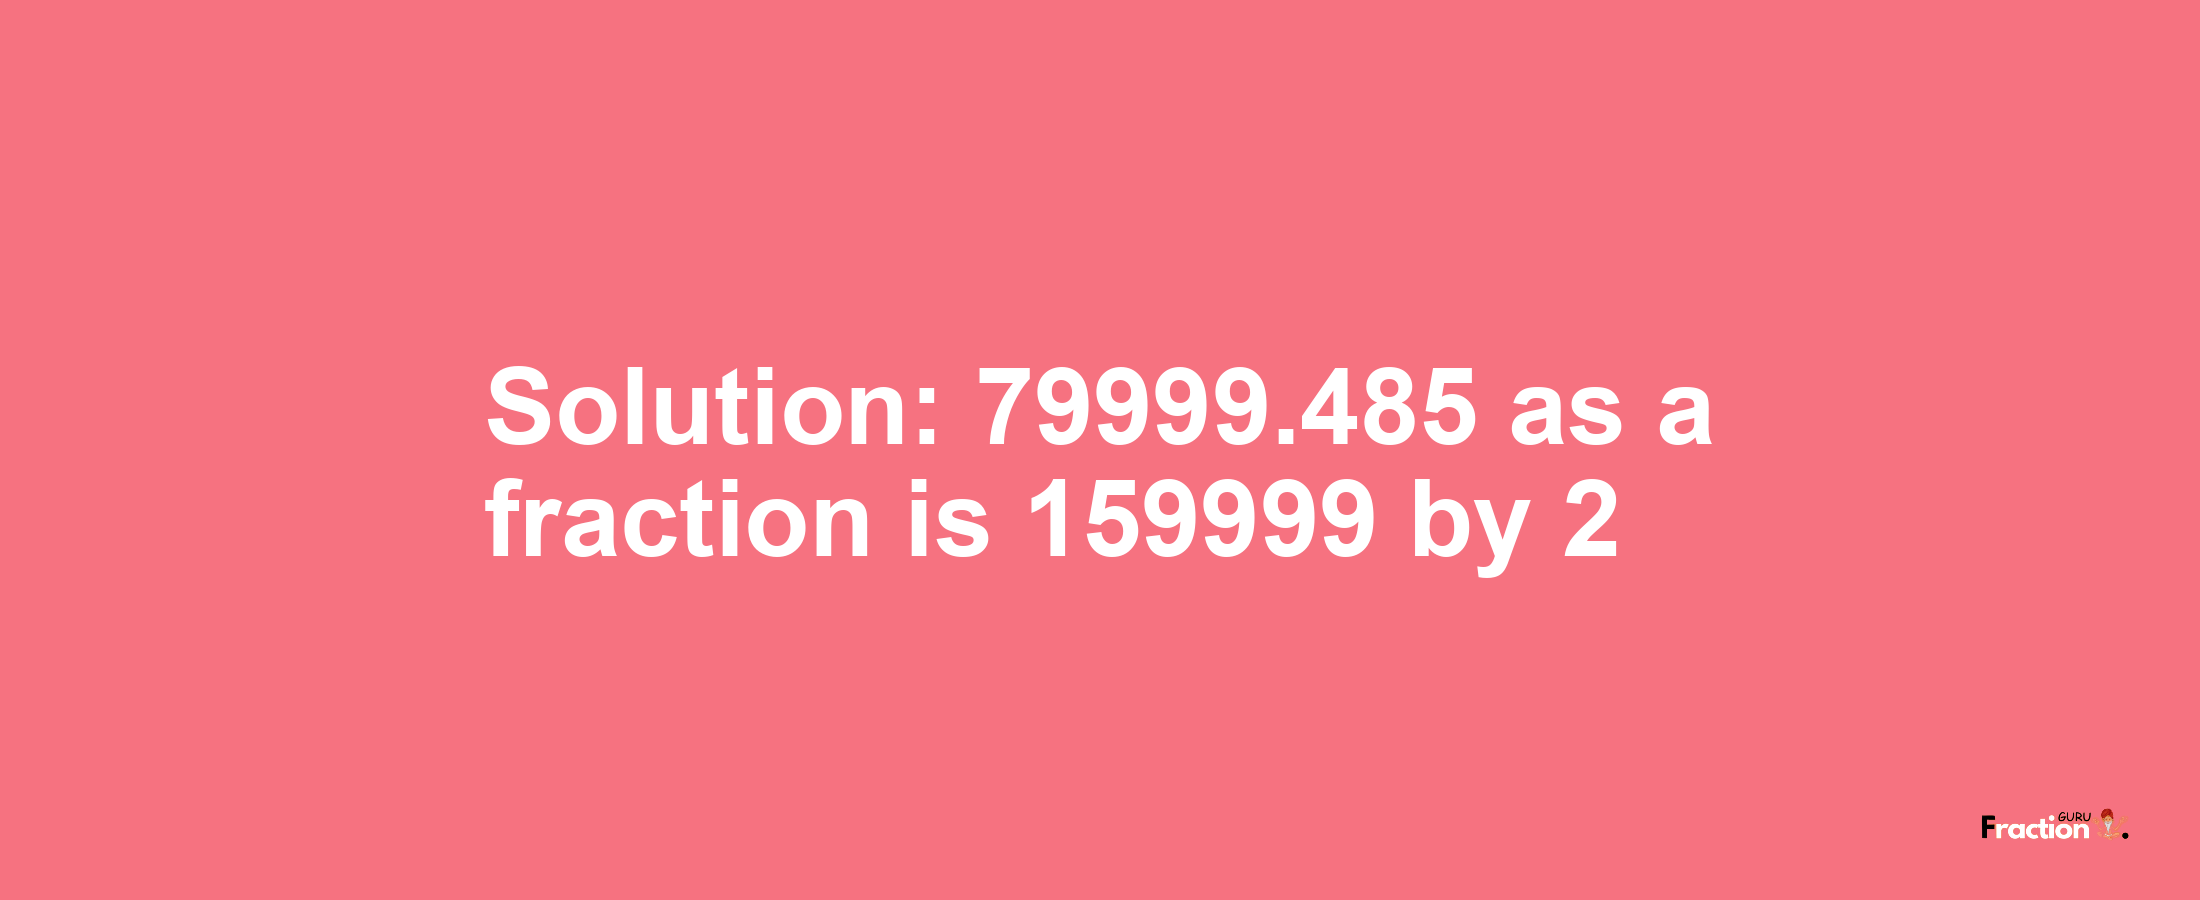 Solution:79999.485 as a fraction is 159999/2